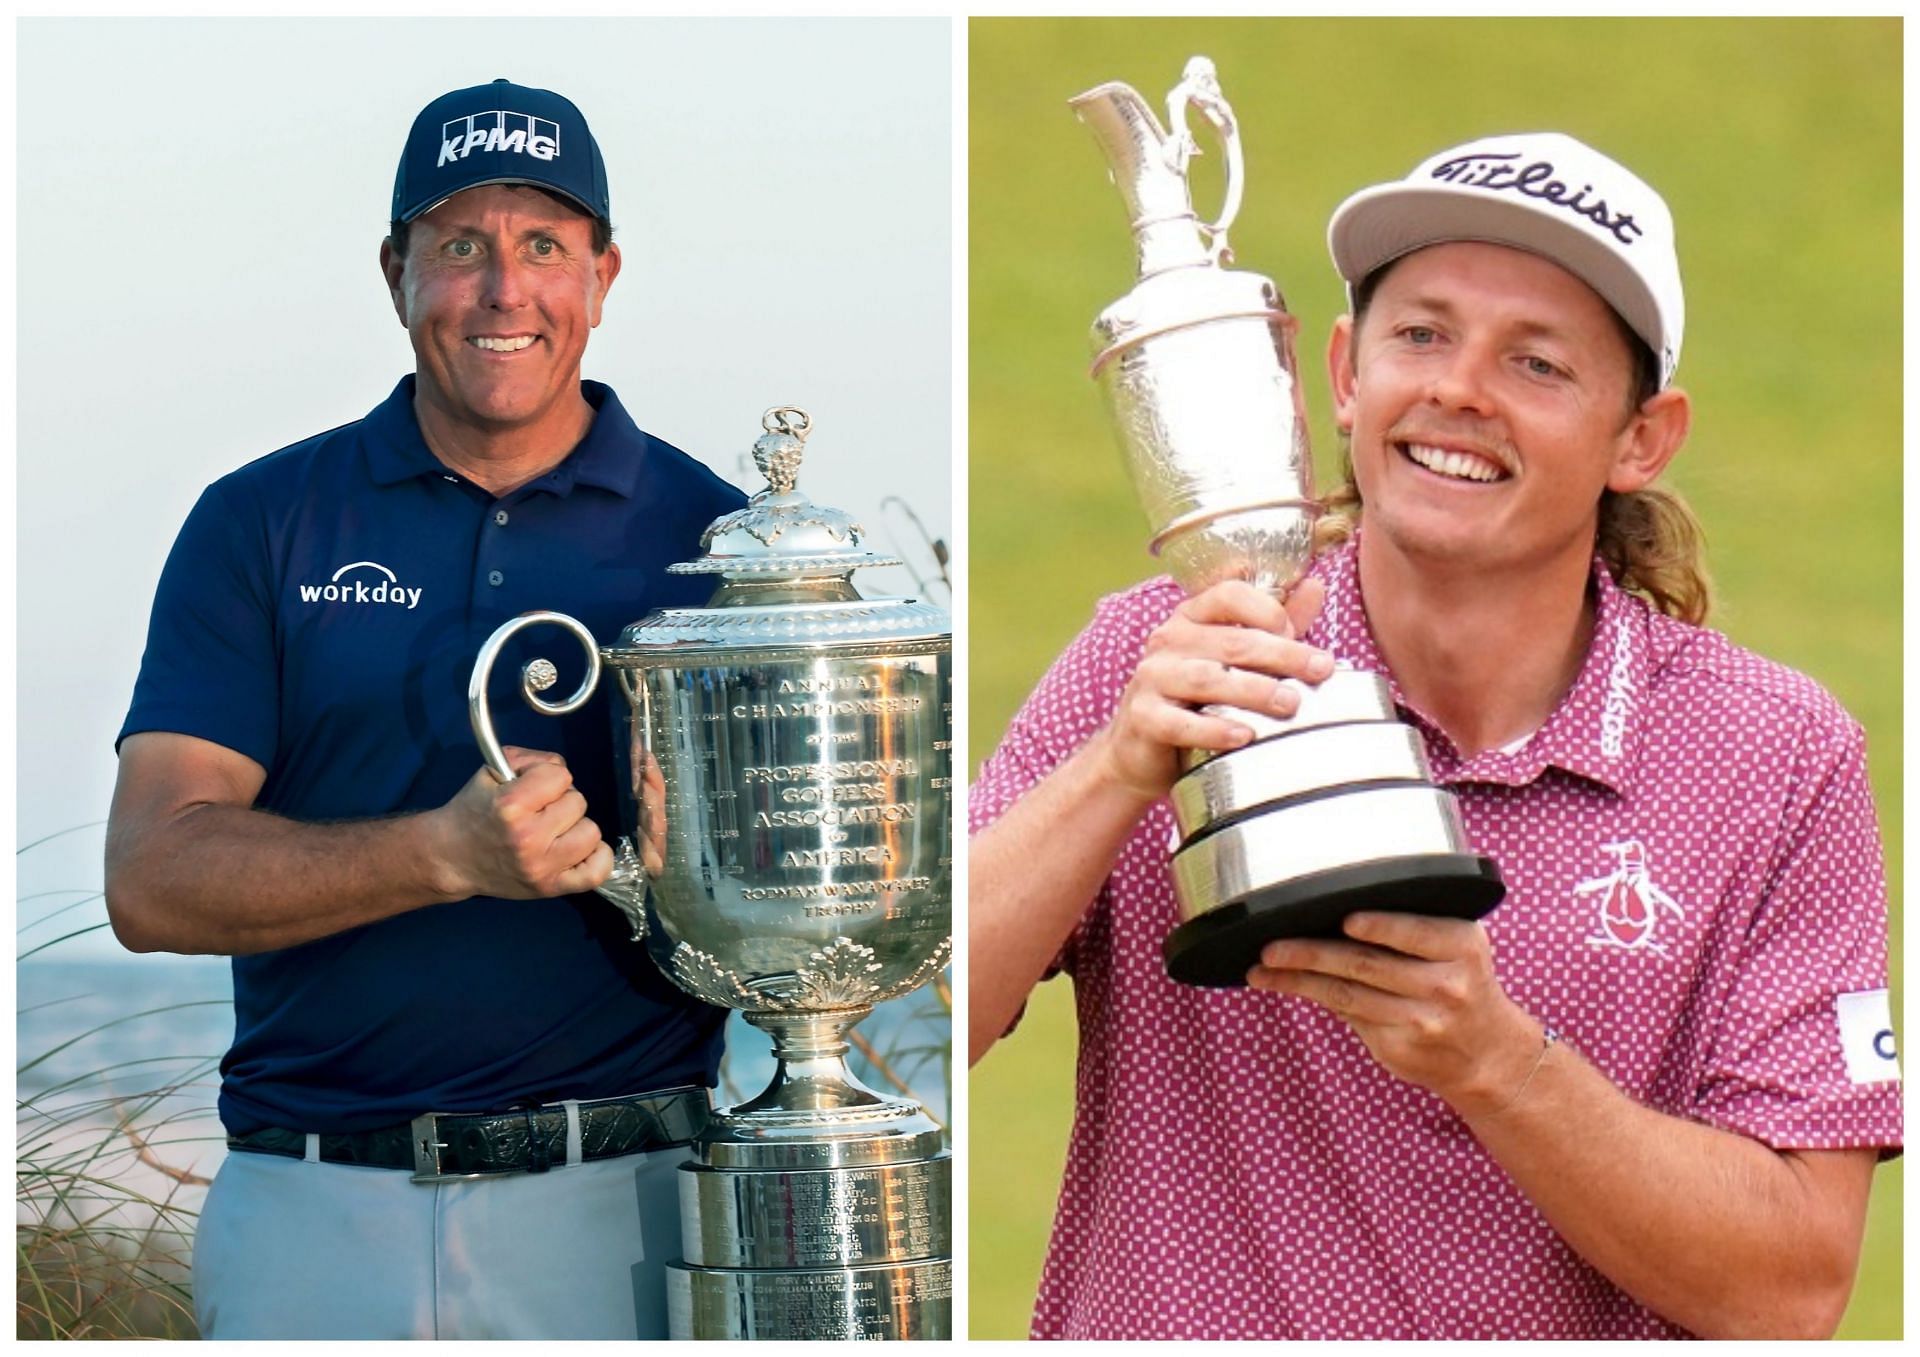 Phil Mickelson and Cameron smith are among the golfers who have won the major championship